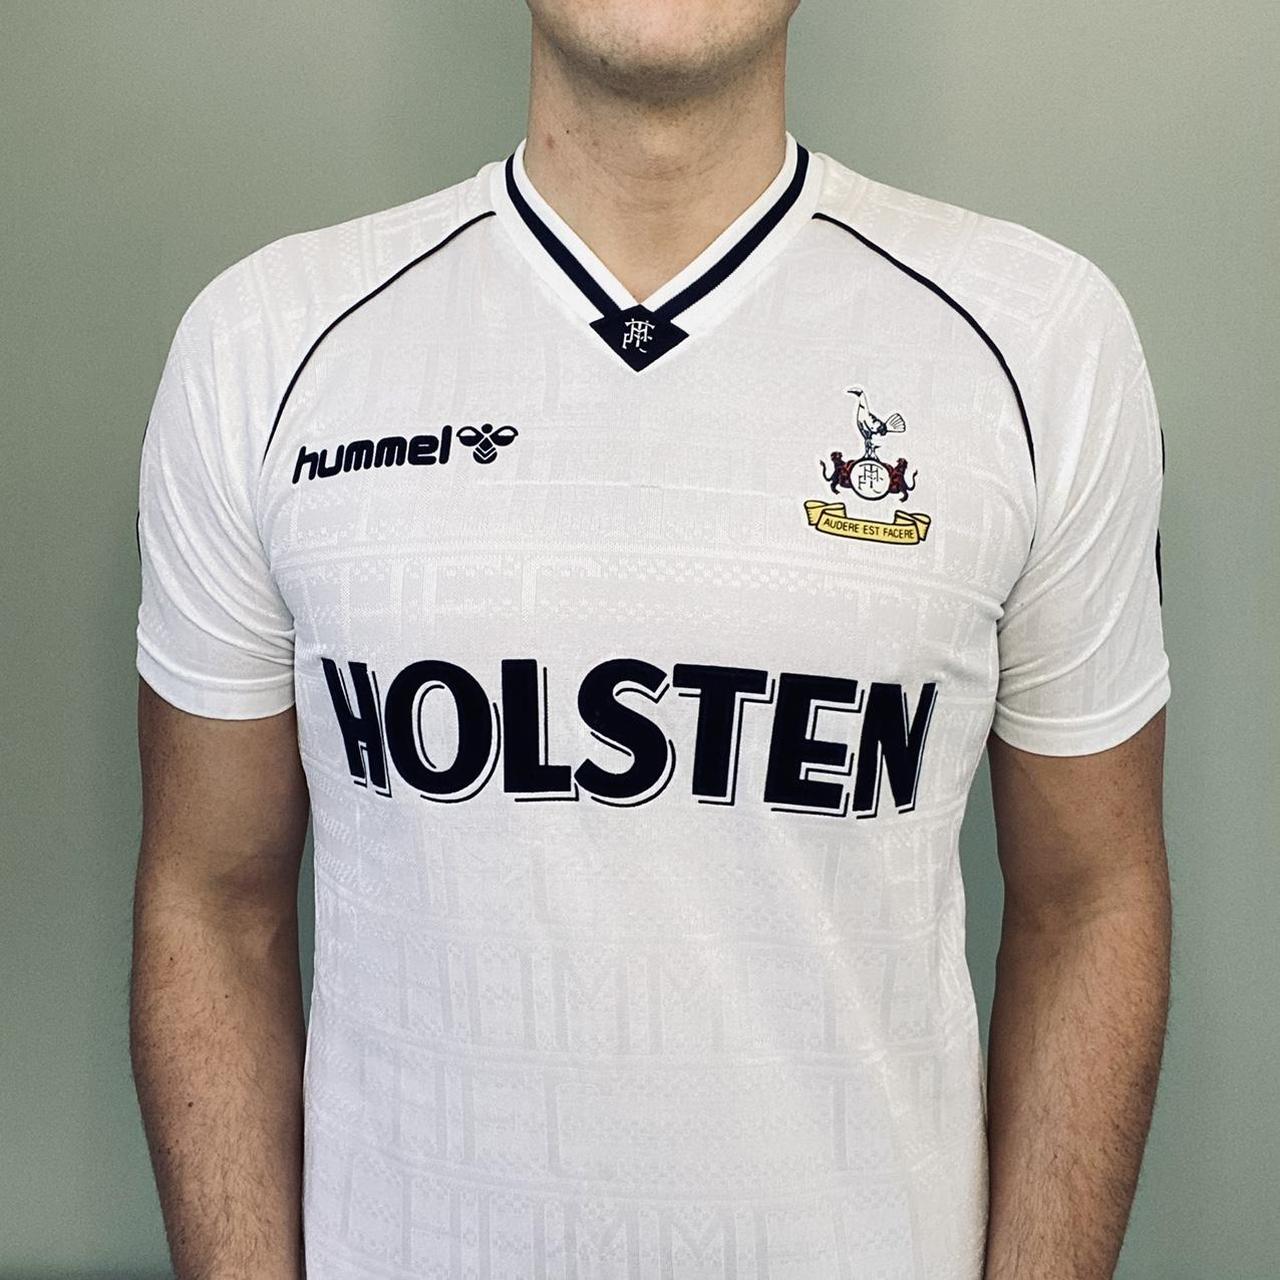 Football Shirt Collective — Shirt of the day: Spurs, hummel, 1989/90  courtesy